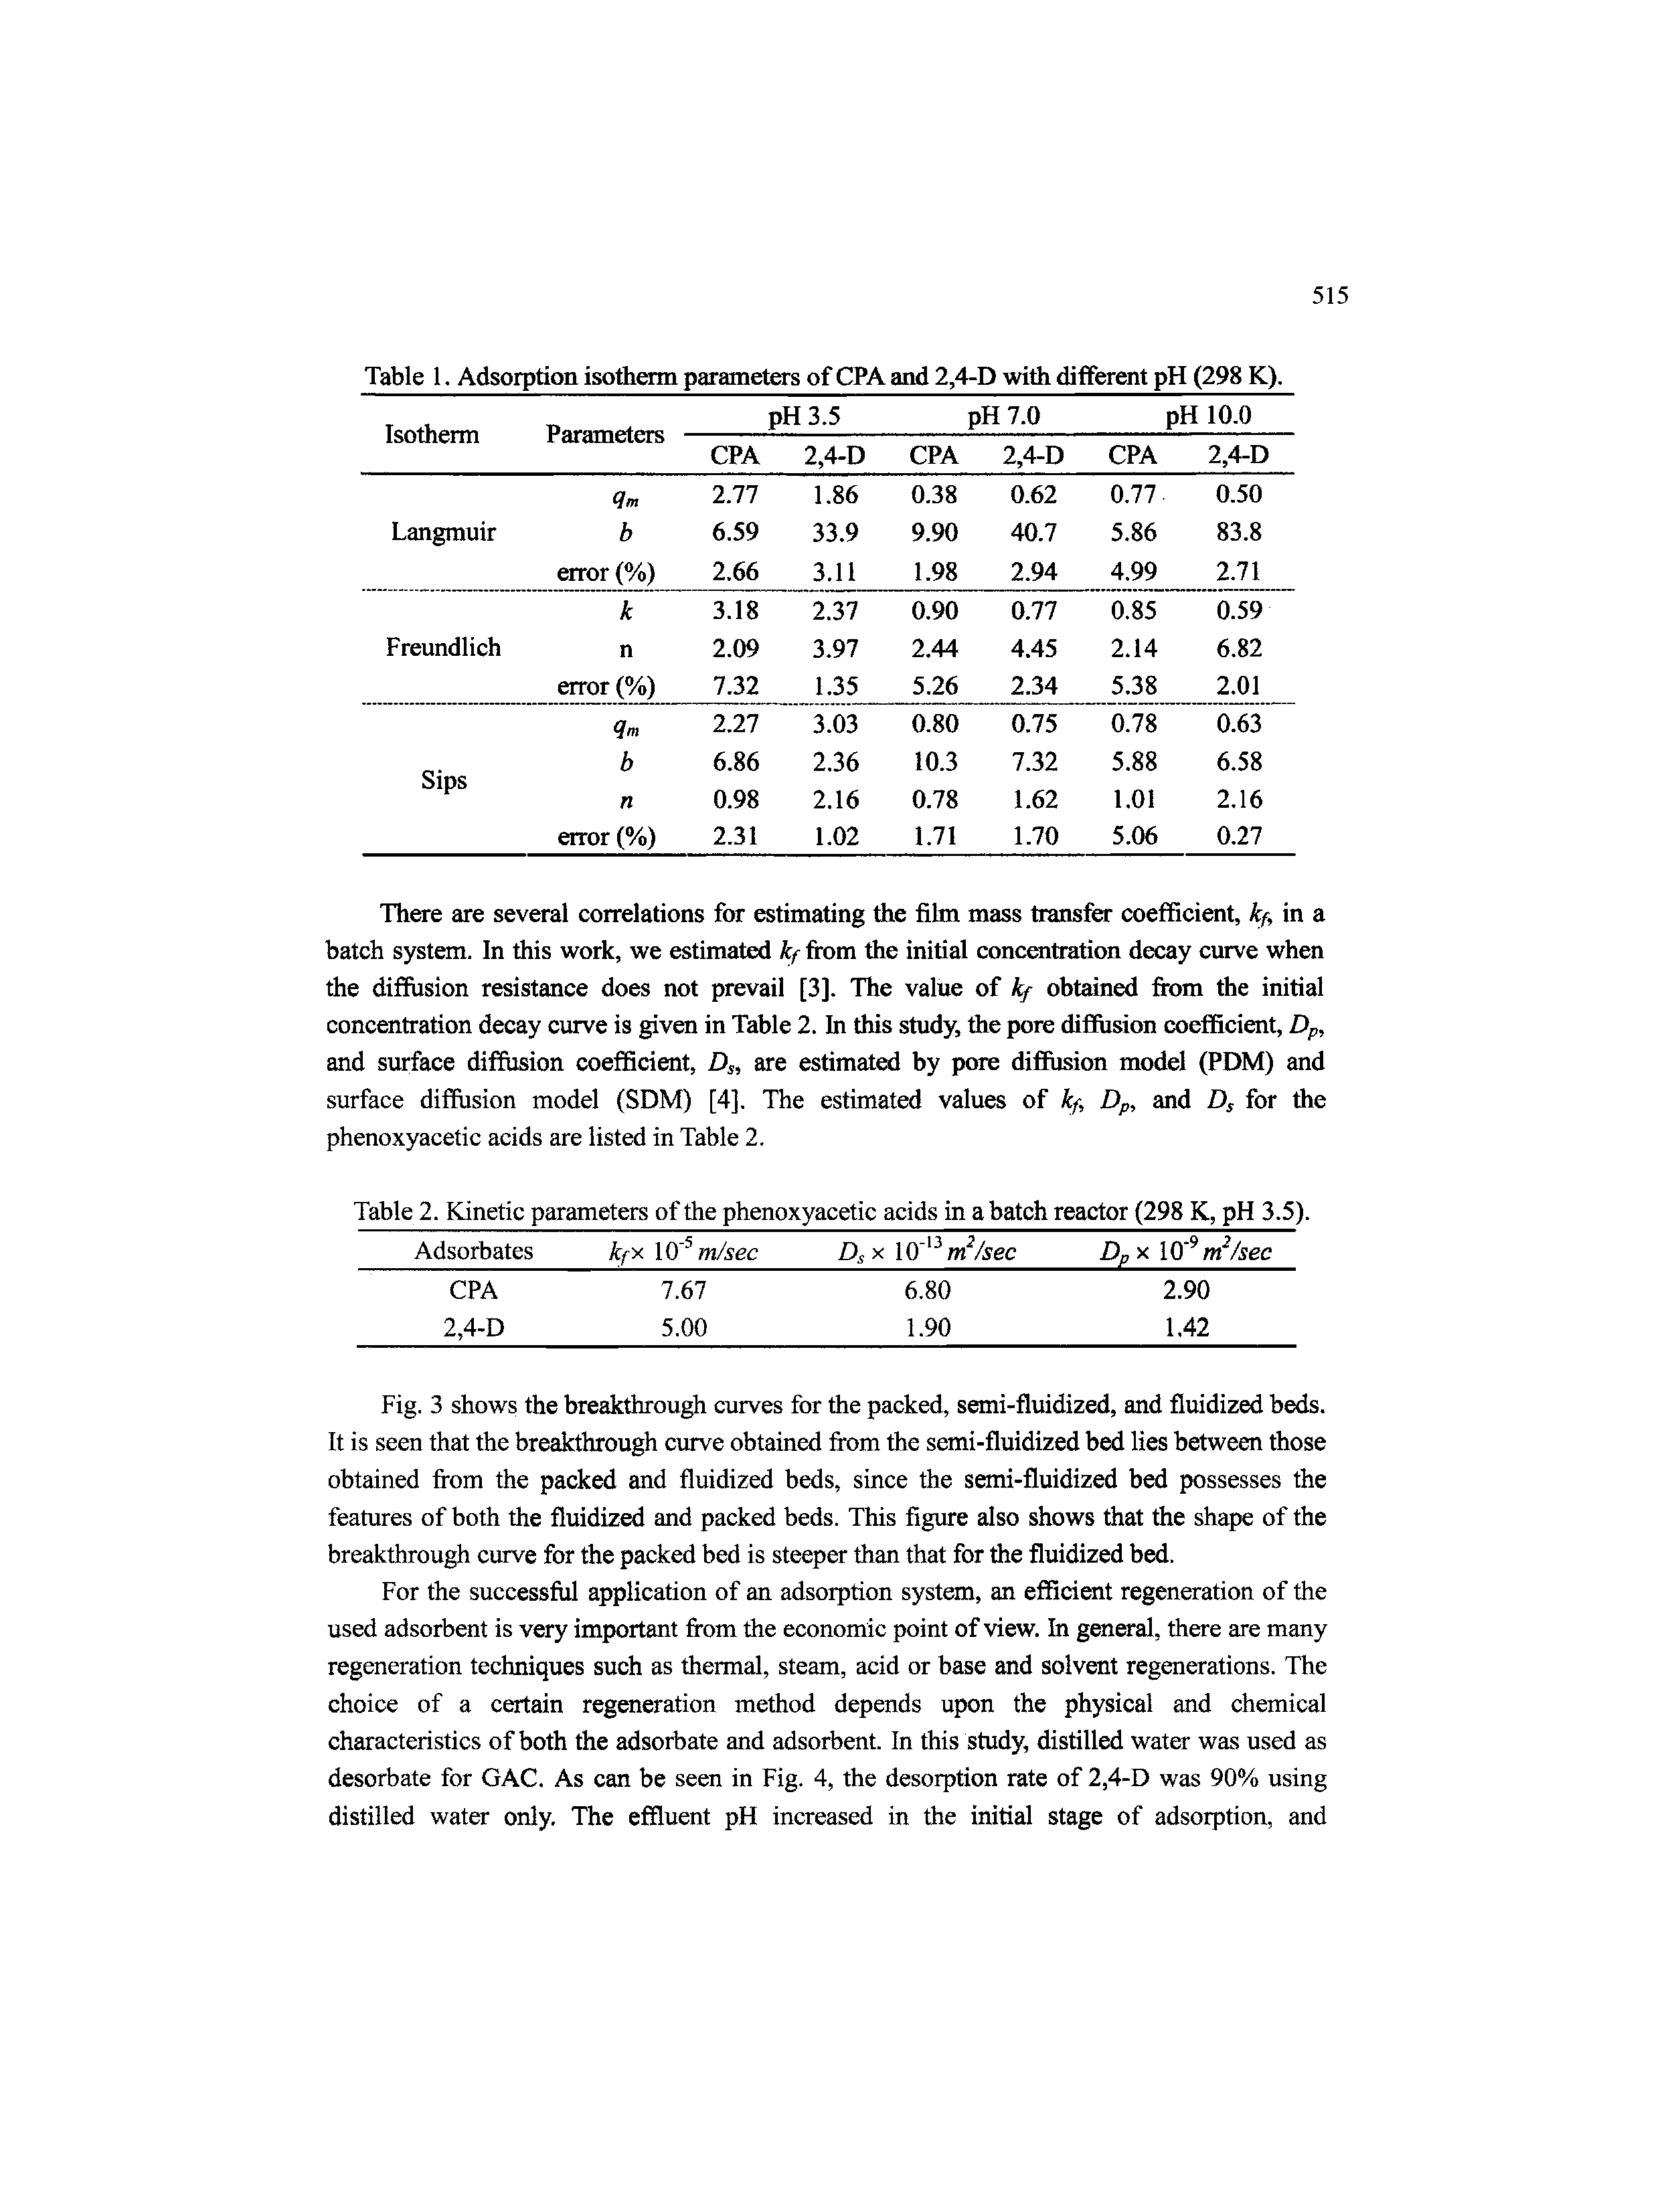 Table 2. Kinetic parameters of the phenoxyacetic acids in a batch reactor (298 K, pH 3.5).